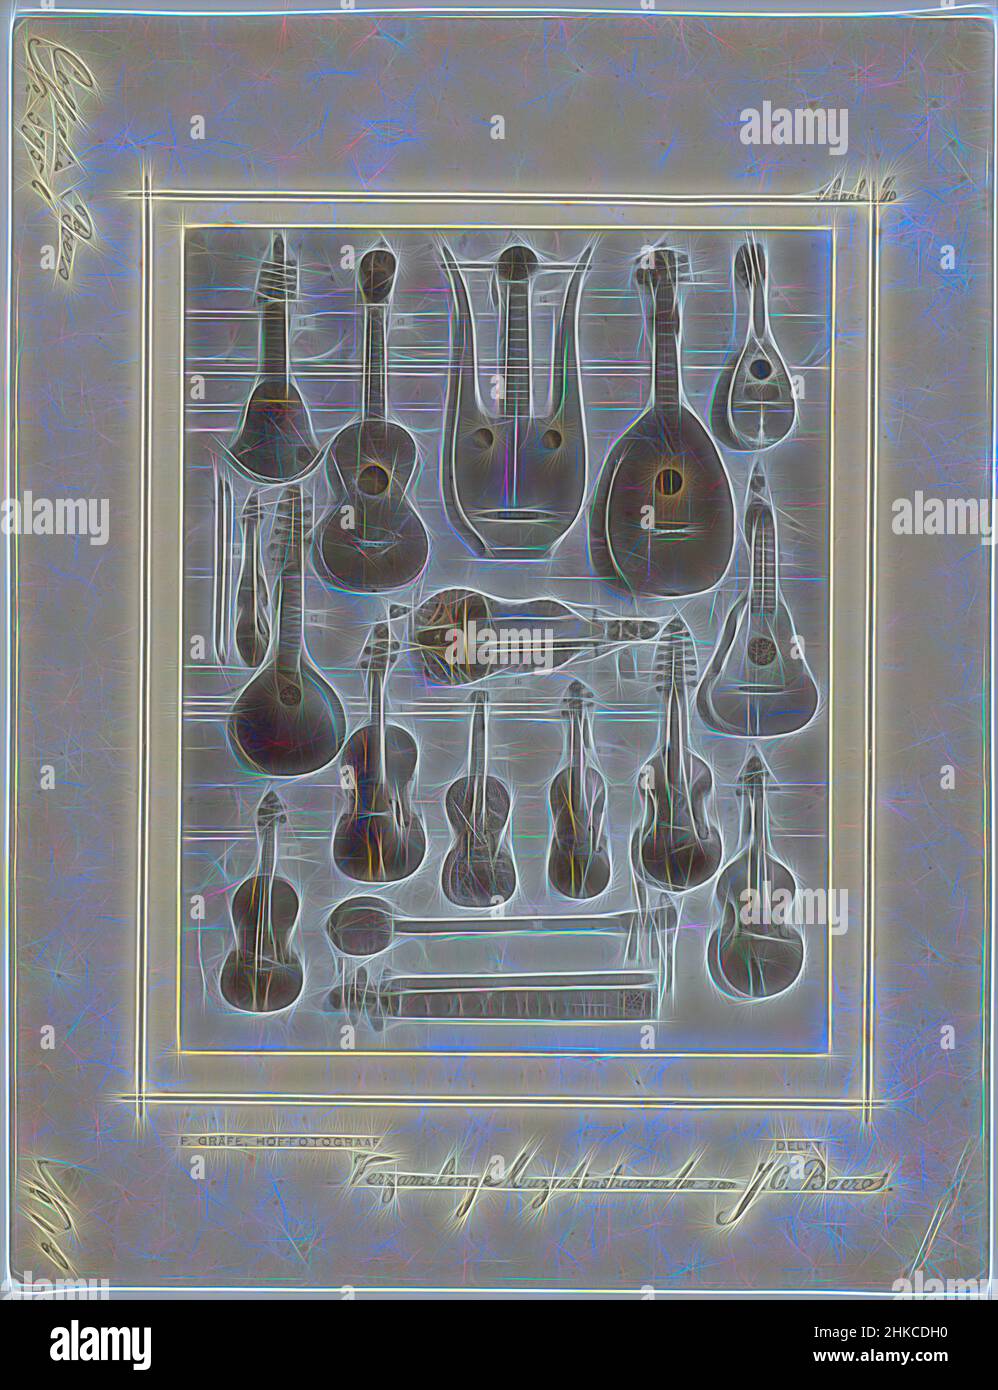 Inspired by Collection of musical instruments from the collection of the  composer J.C. Boers: stringed instruments, Collection of Musical Instruments  of J.C. Boers, Frederik Christiaan Filip Gräfe, Delft, 1863 - c. 1905,